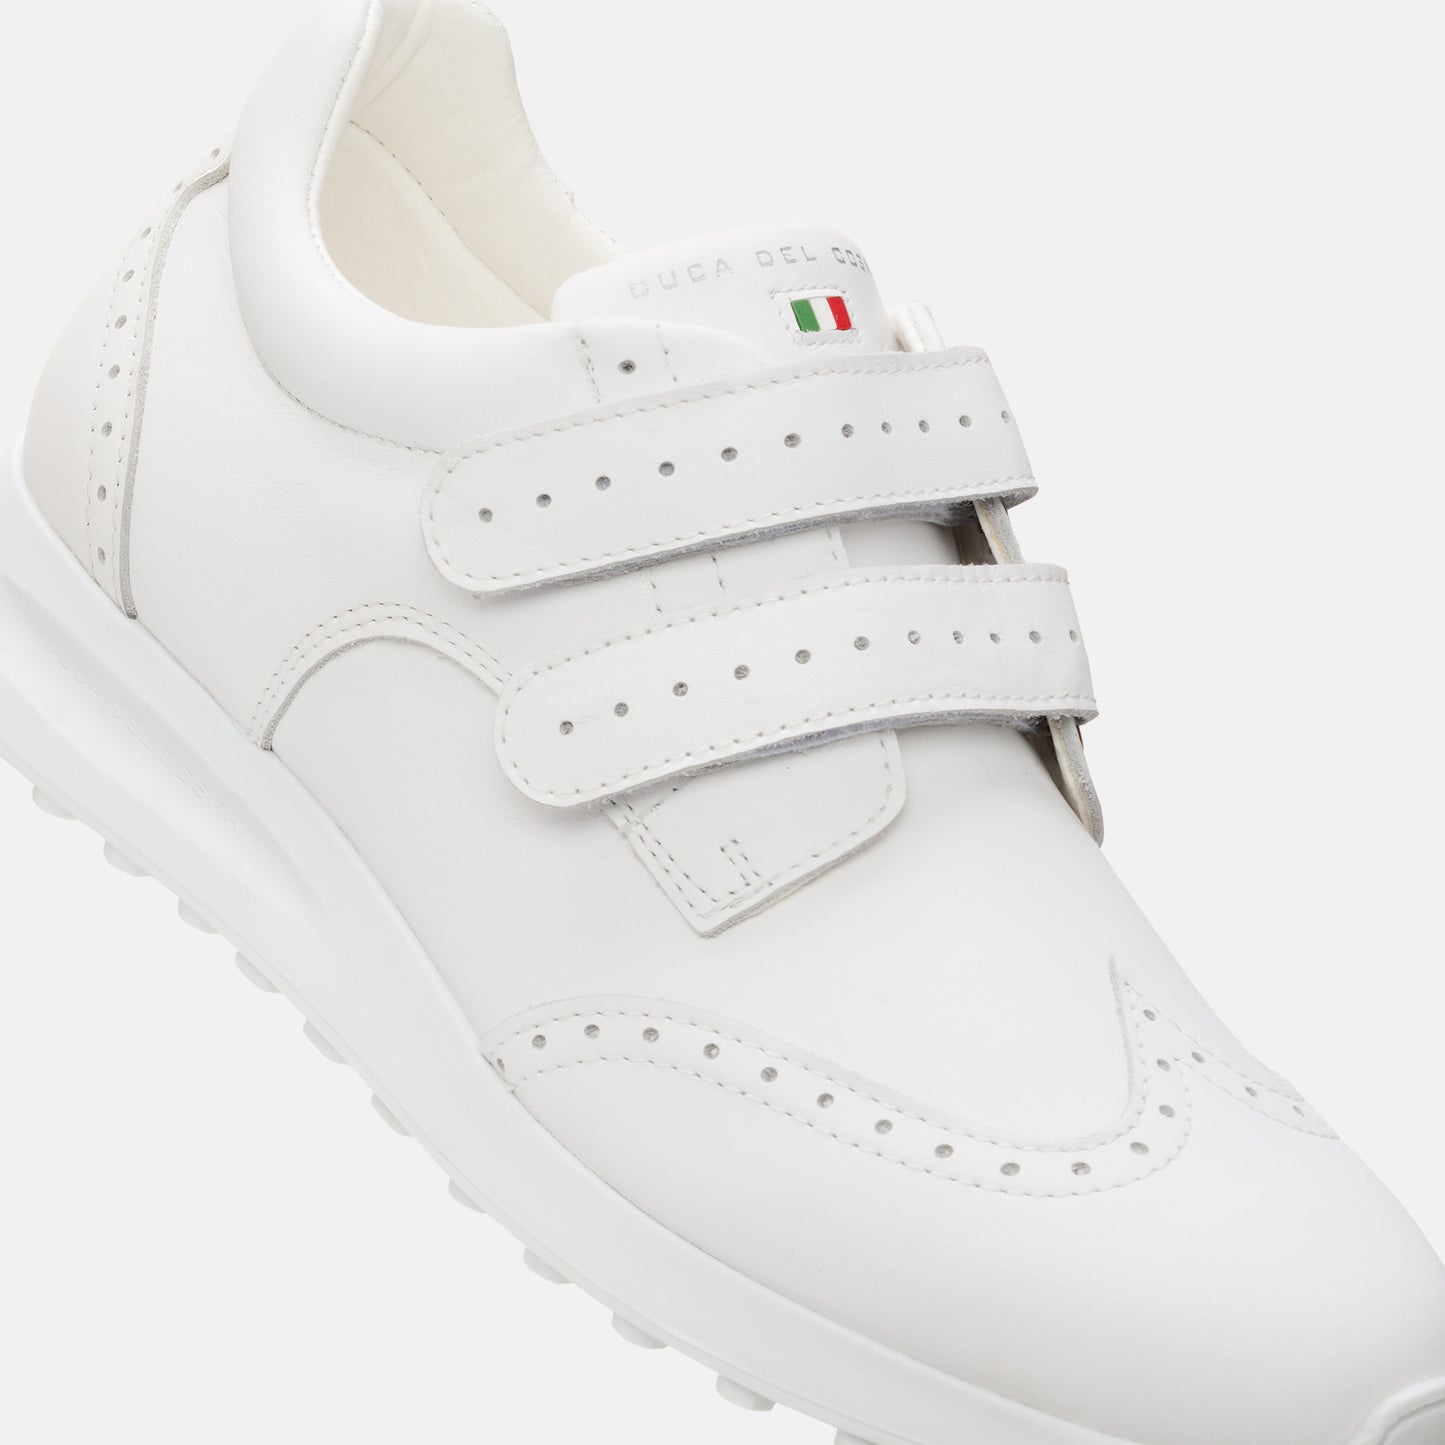 Ladies White Golf Shoes, White Golf shoes, Duca del Cosma Women's white Golf Shoes